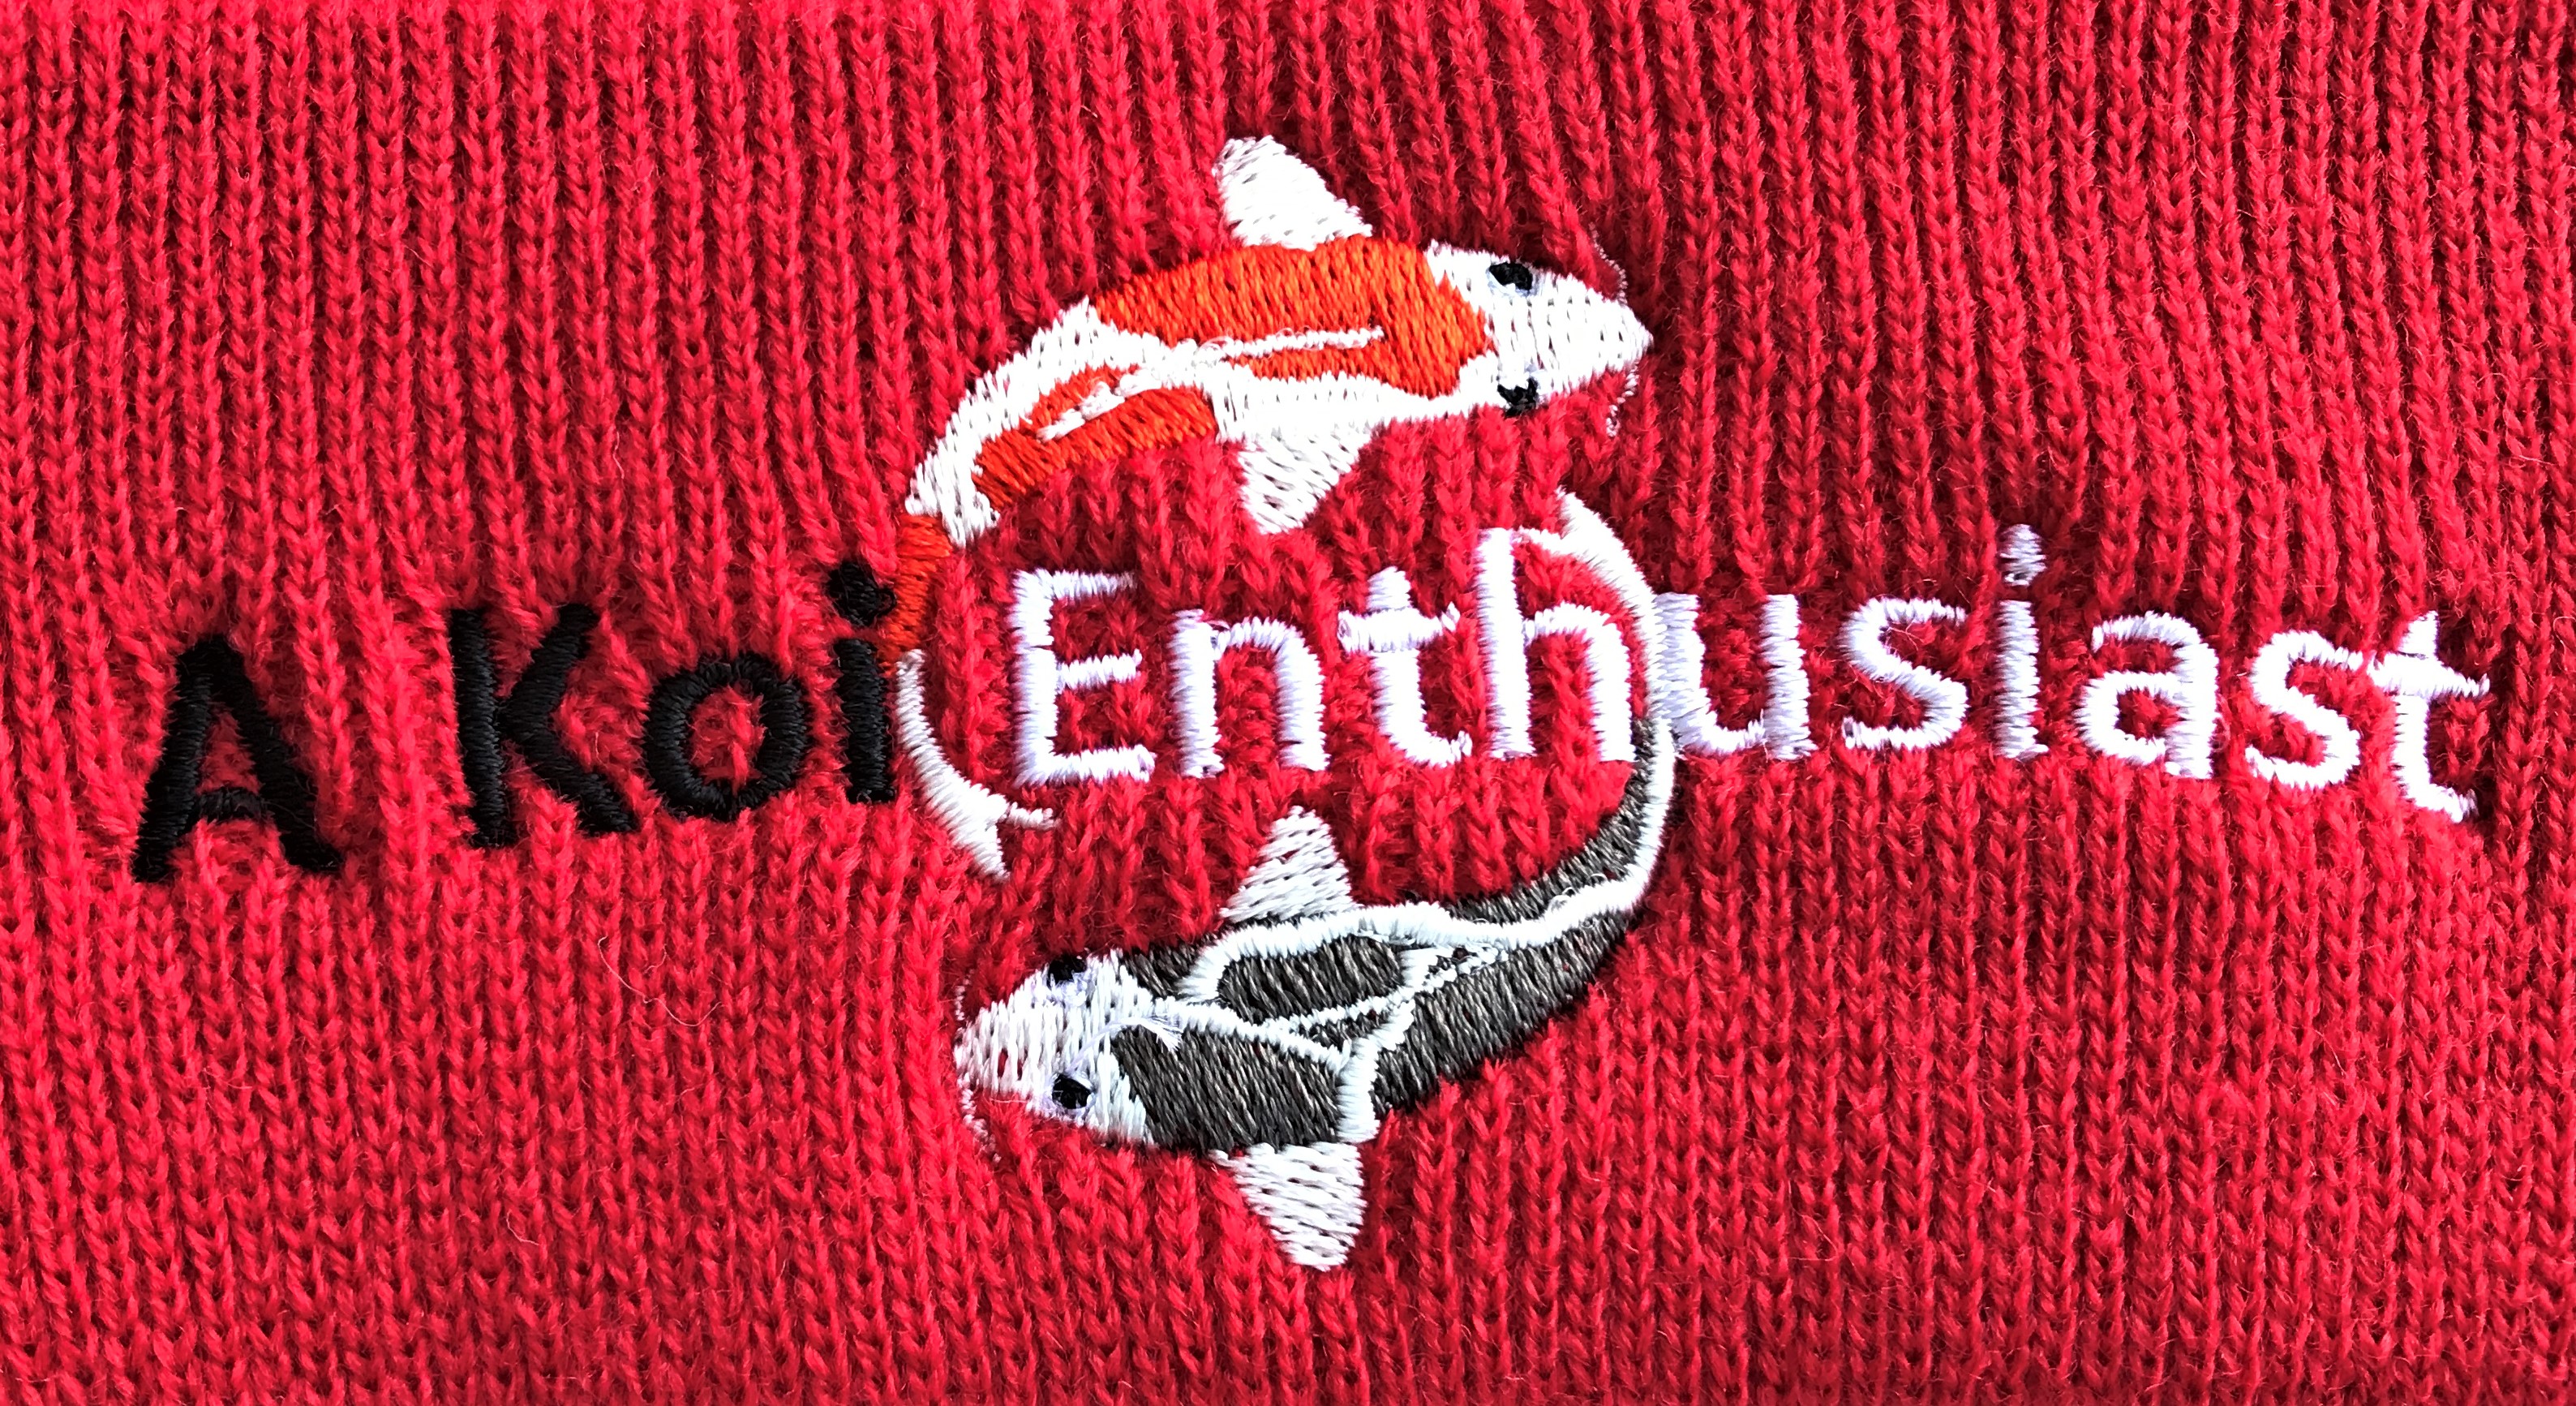 Red Classic "A Koi Enthusiast" Embroidered Beanie